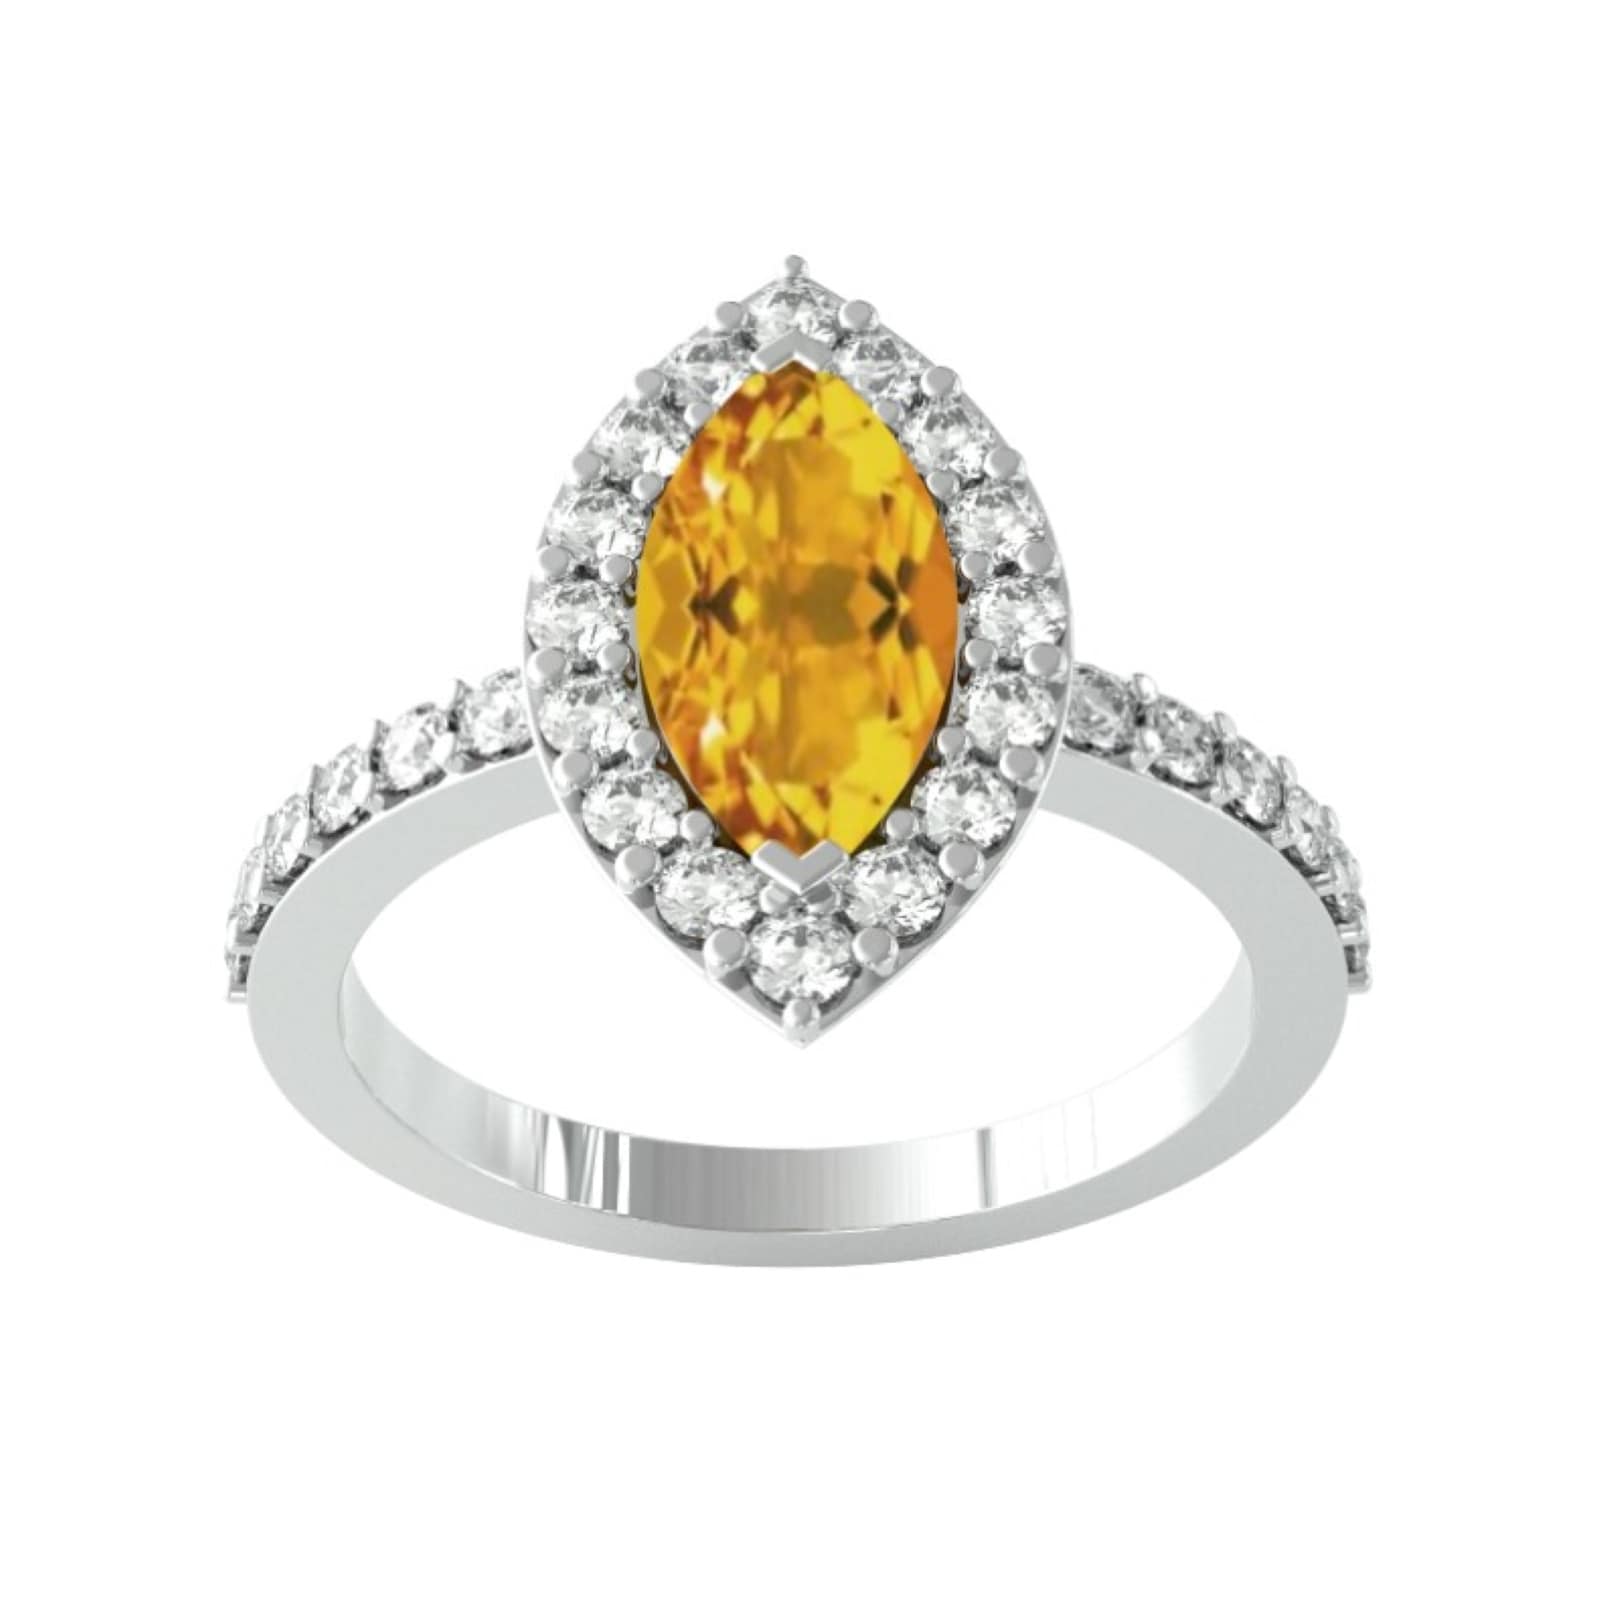 9ct White Gold Marquise Cut Citrine & Diamond Ring - Ring Size M.5